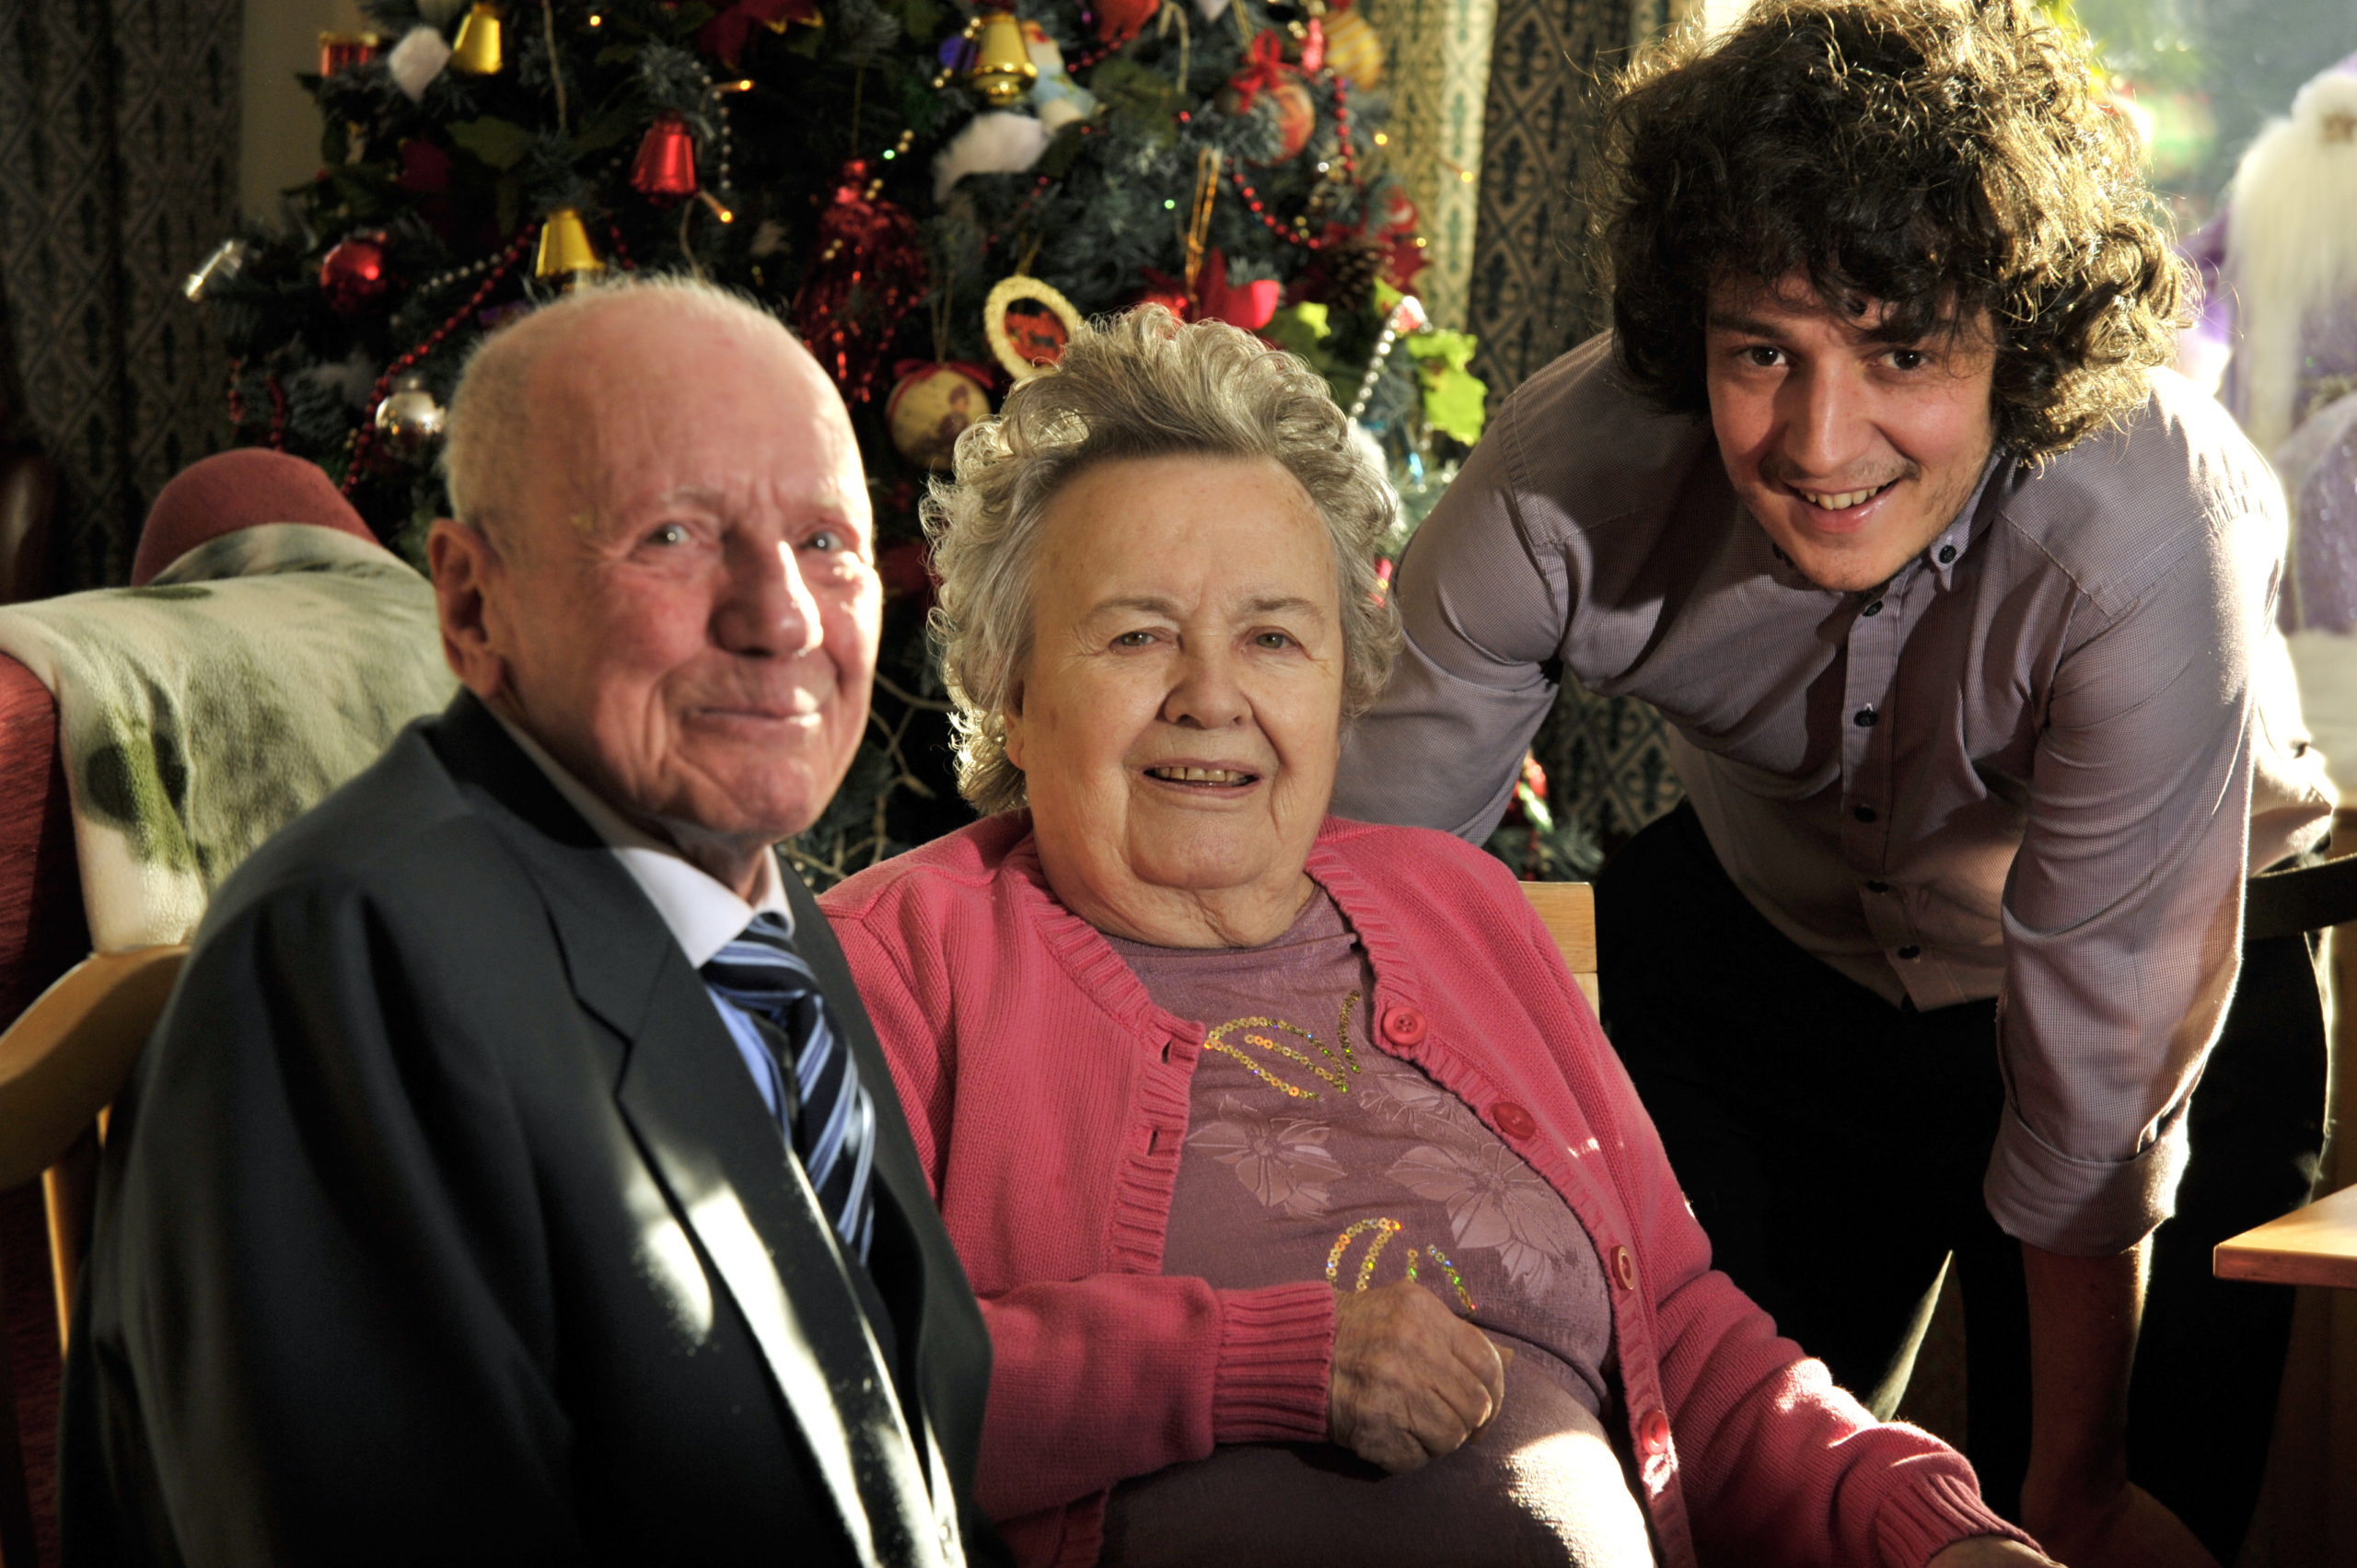 Pictures at Taliesin residential home, Bridge Street, Tonypandy. Assistant manager Tom Thatcher, right, chats to Ken Owen,aged 81, left, and Cecilia-Mary Owen, aged 81, middle.